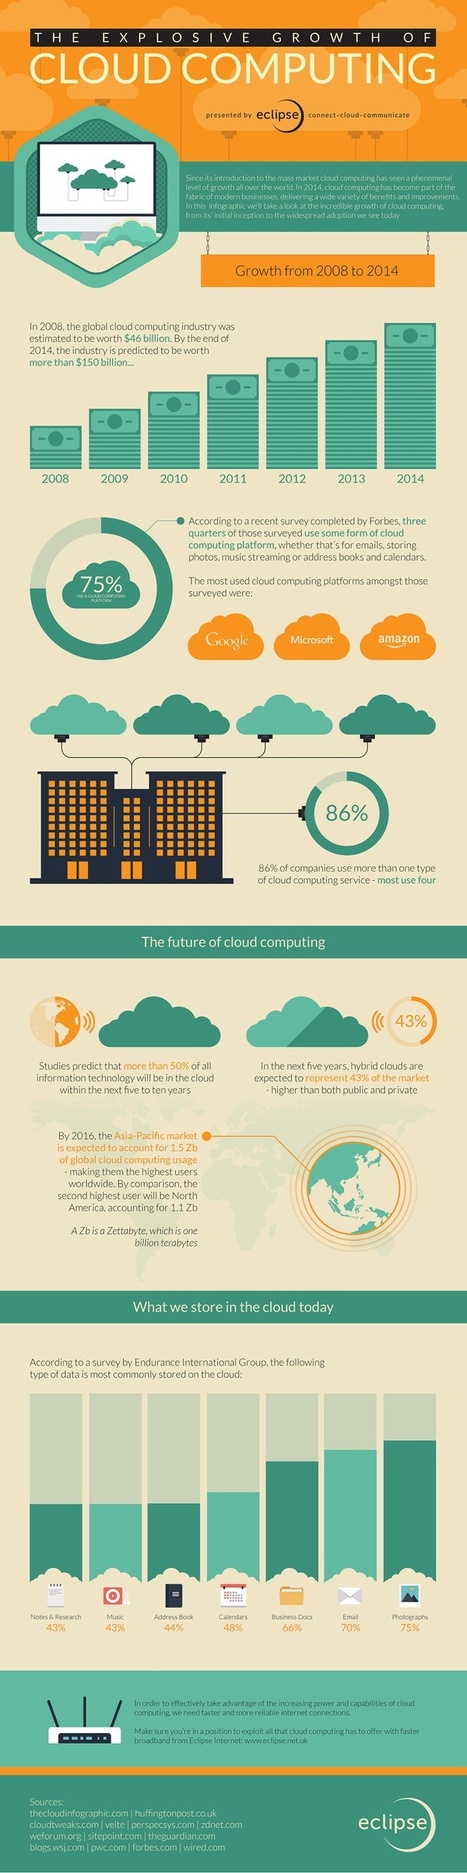 The Explosive Growth of Cloud Computing [INFOGRAPHIC] | E-Learning-Inclusivo (Mashup) | Scoop.it